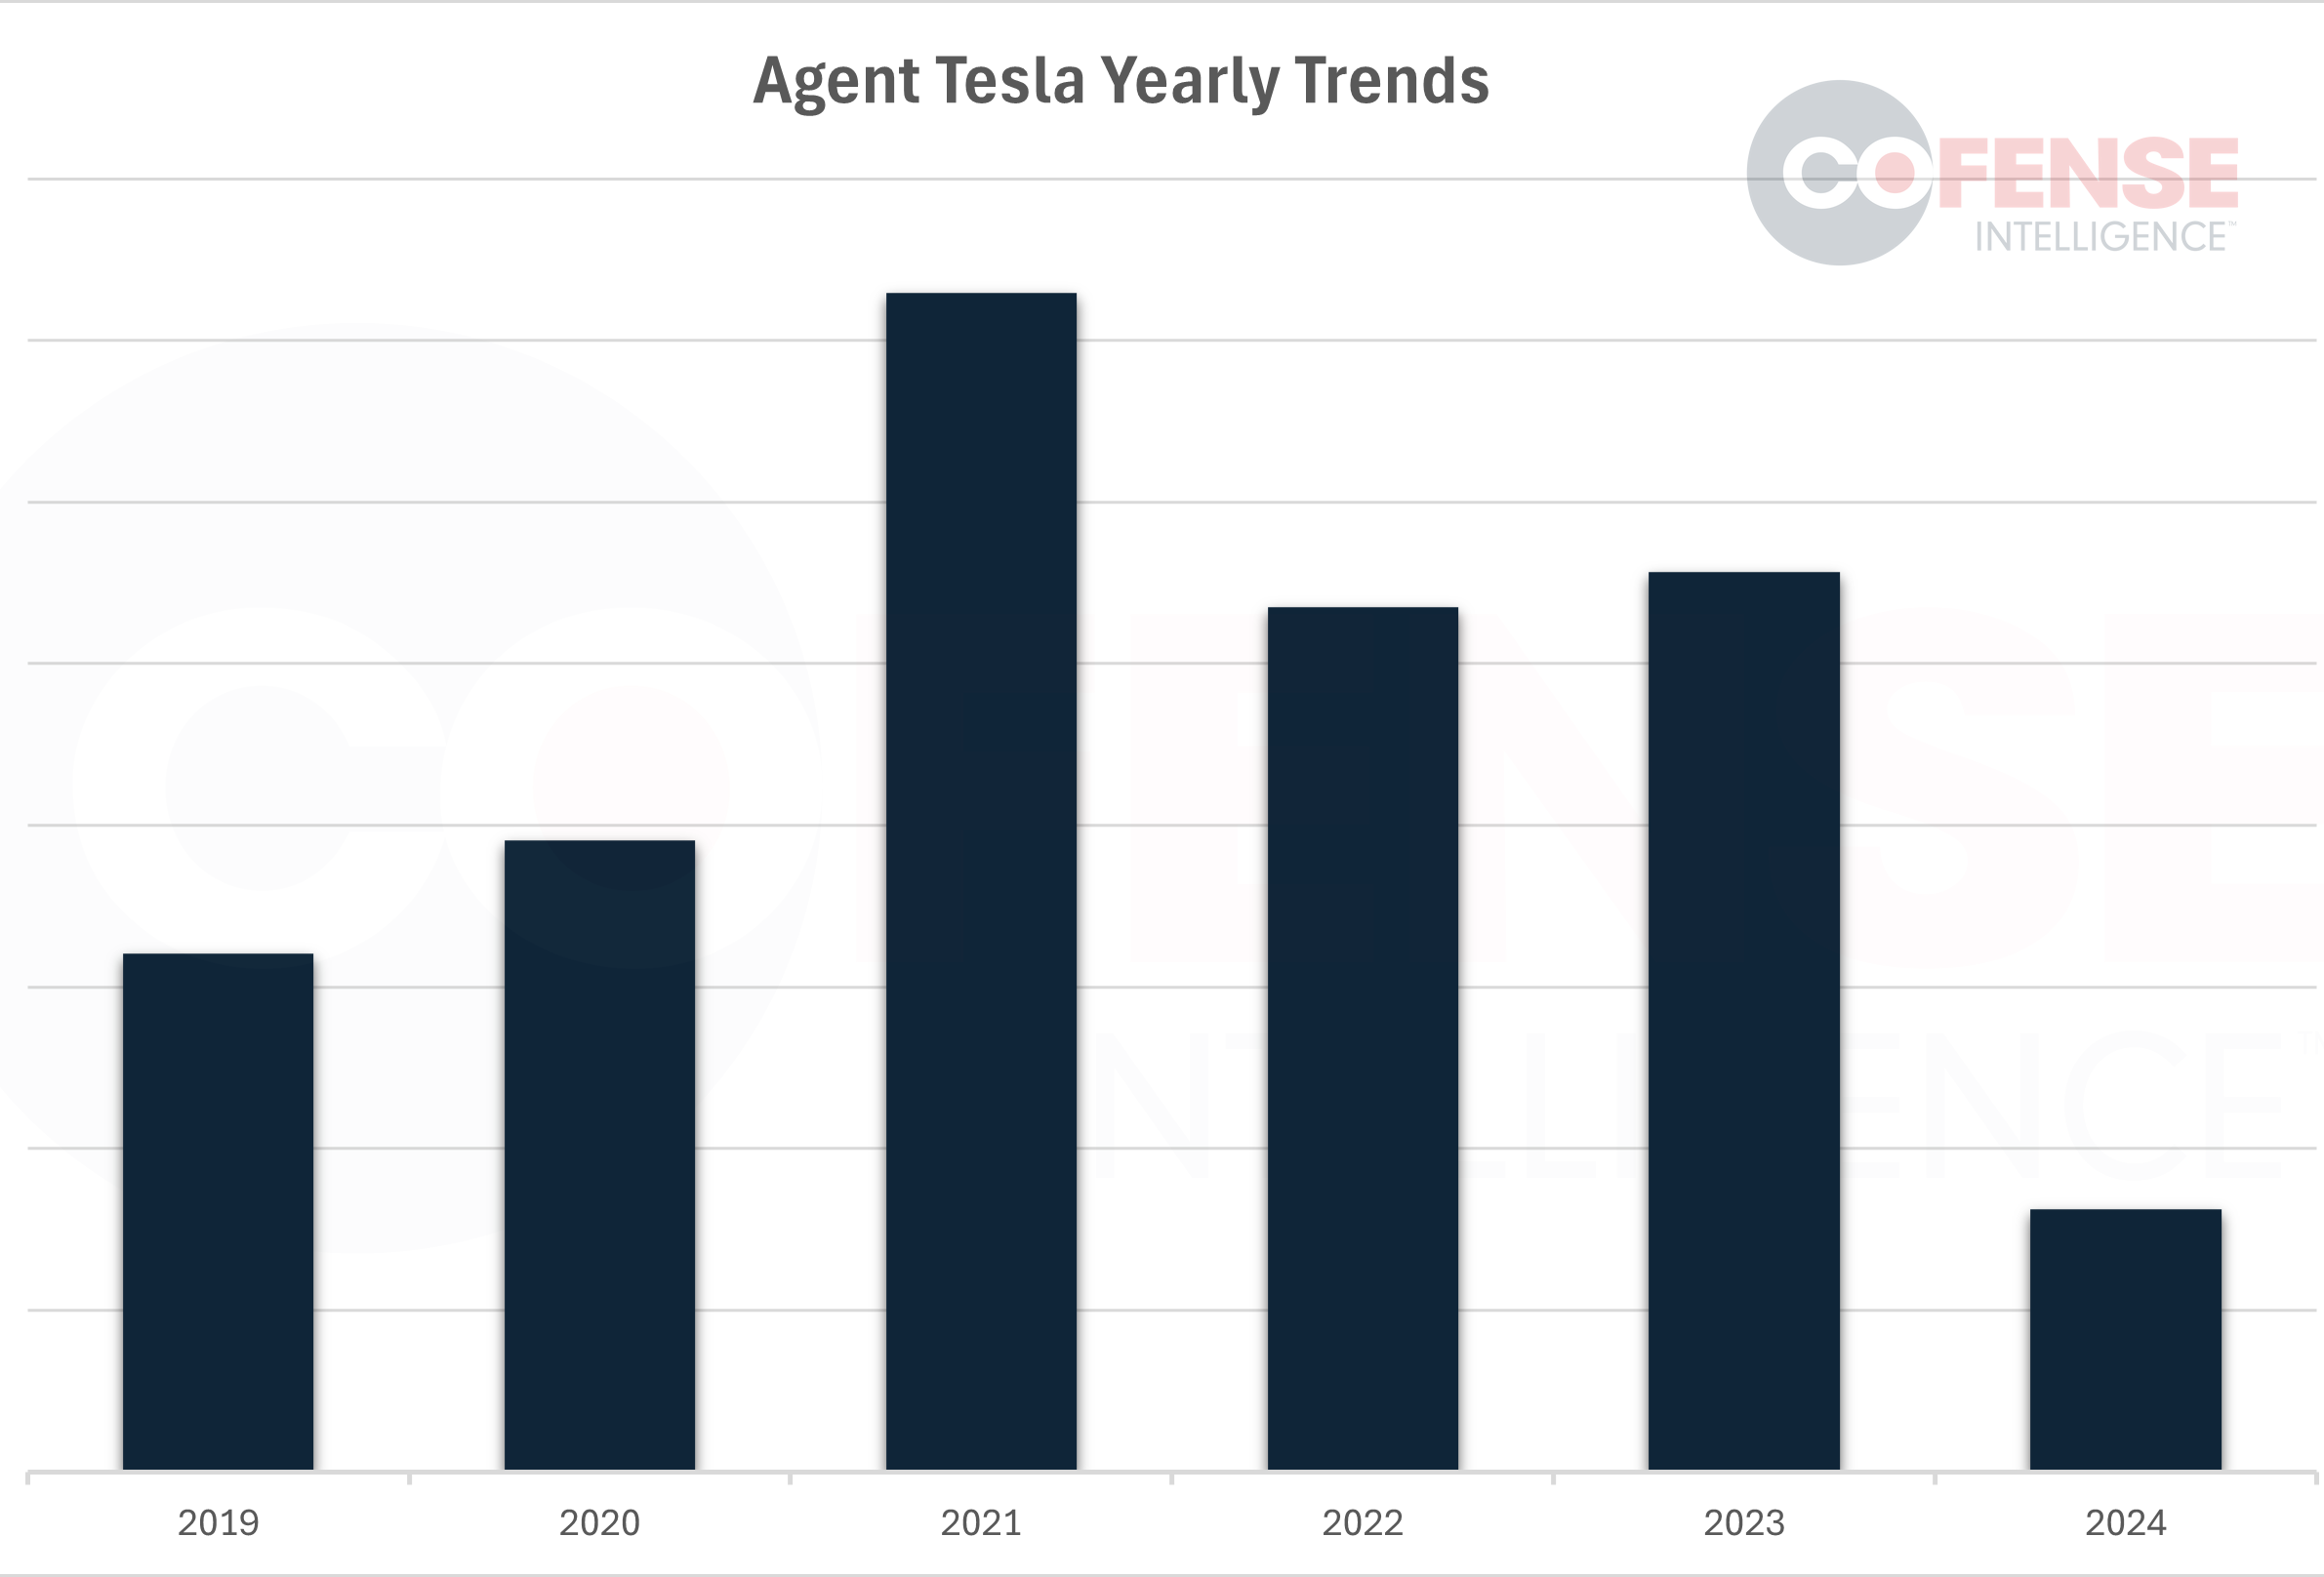 Figure 1: Agent Tesla volumes by year. 